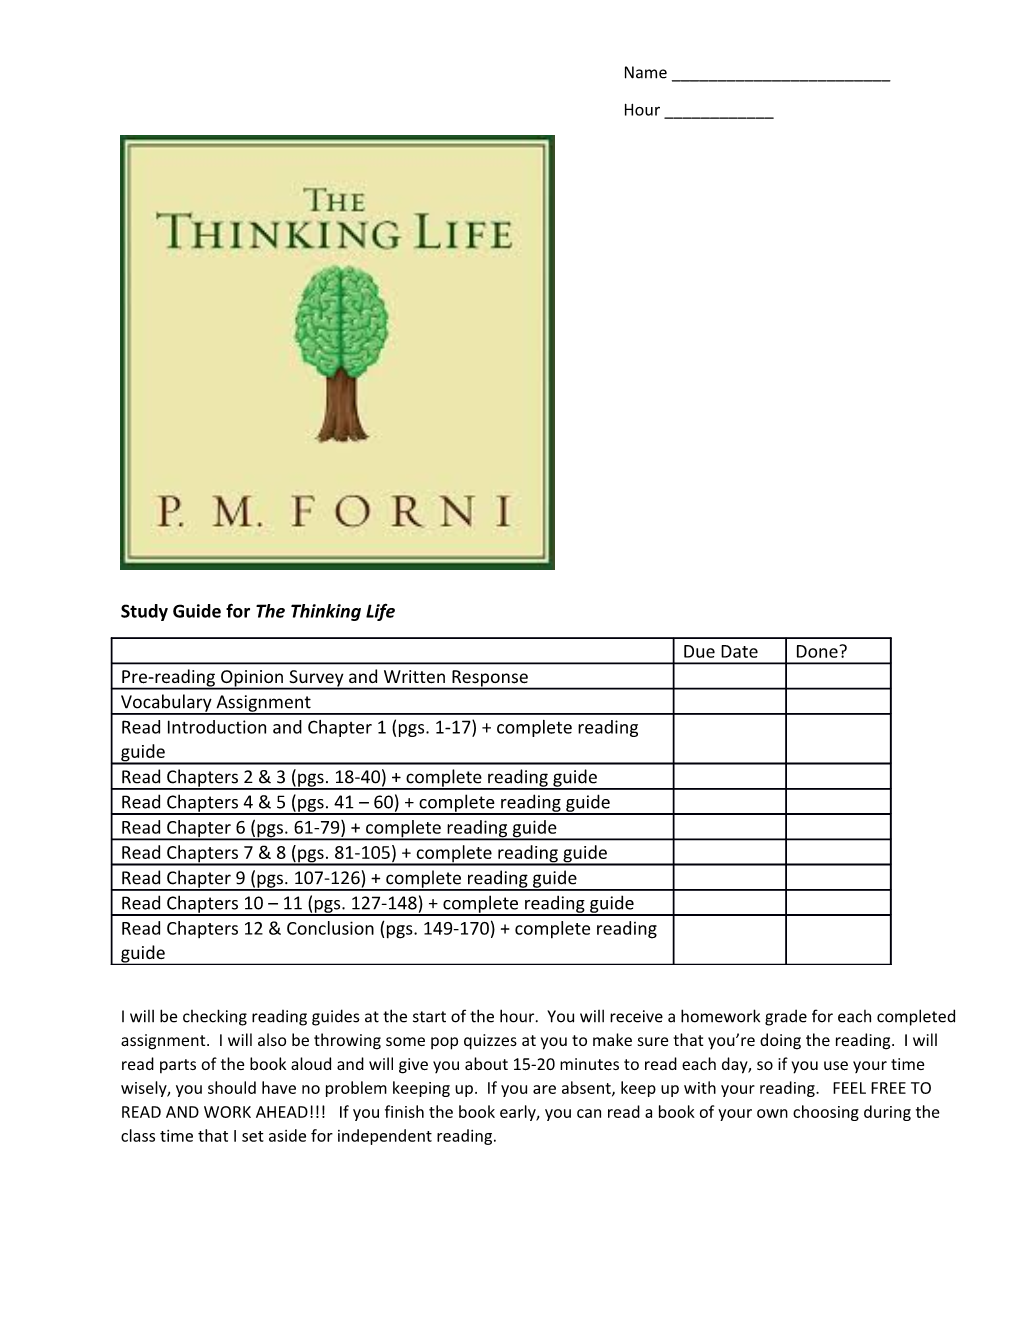 Study Guide for the Thinking Life